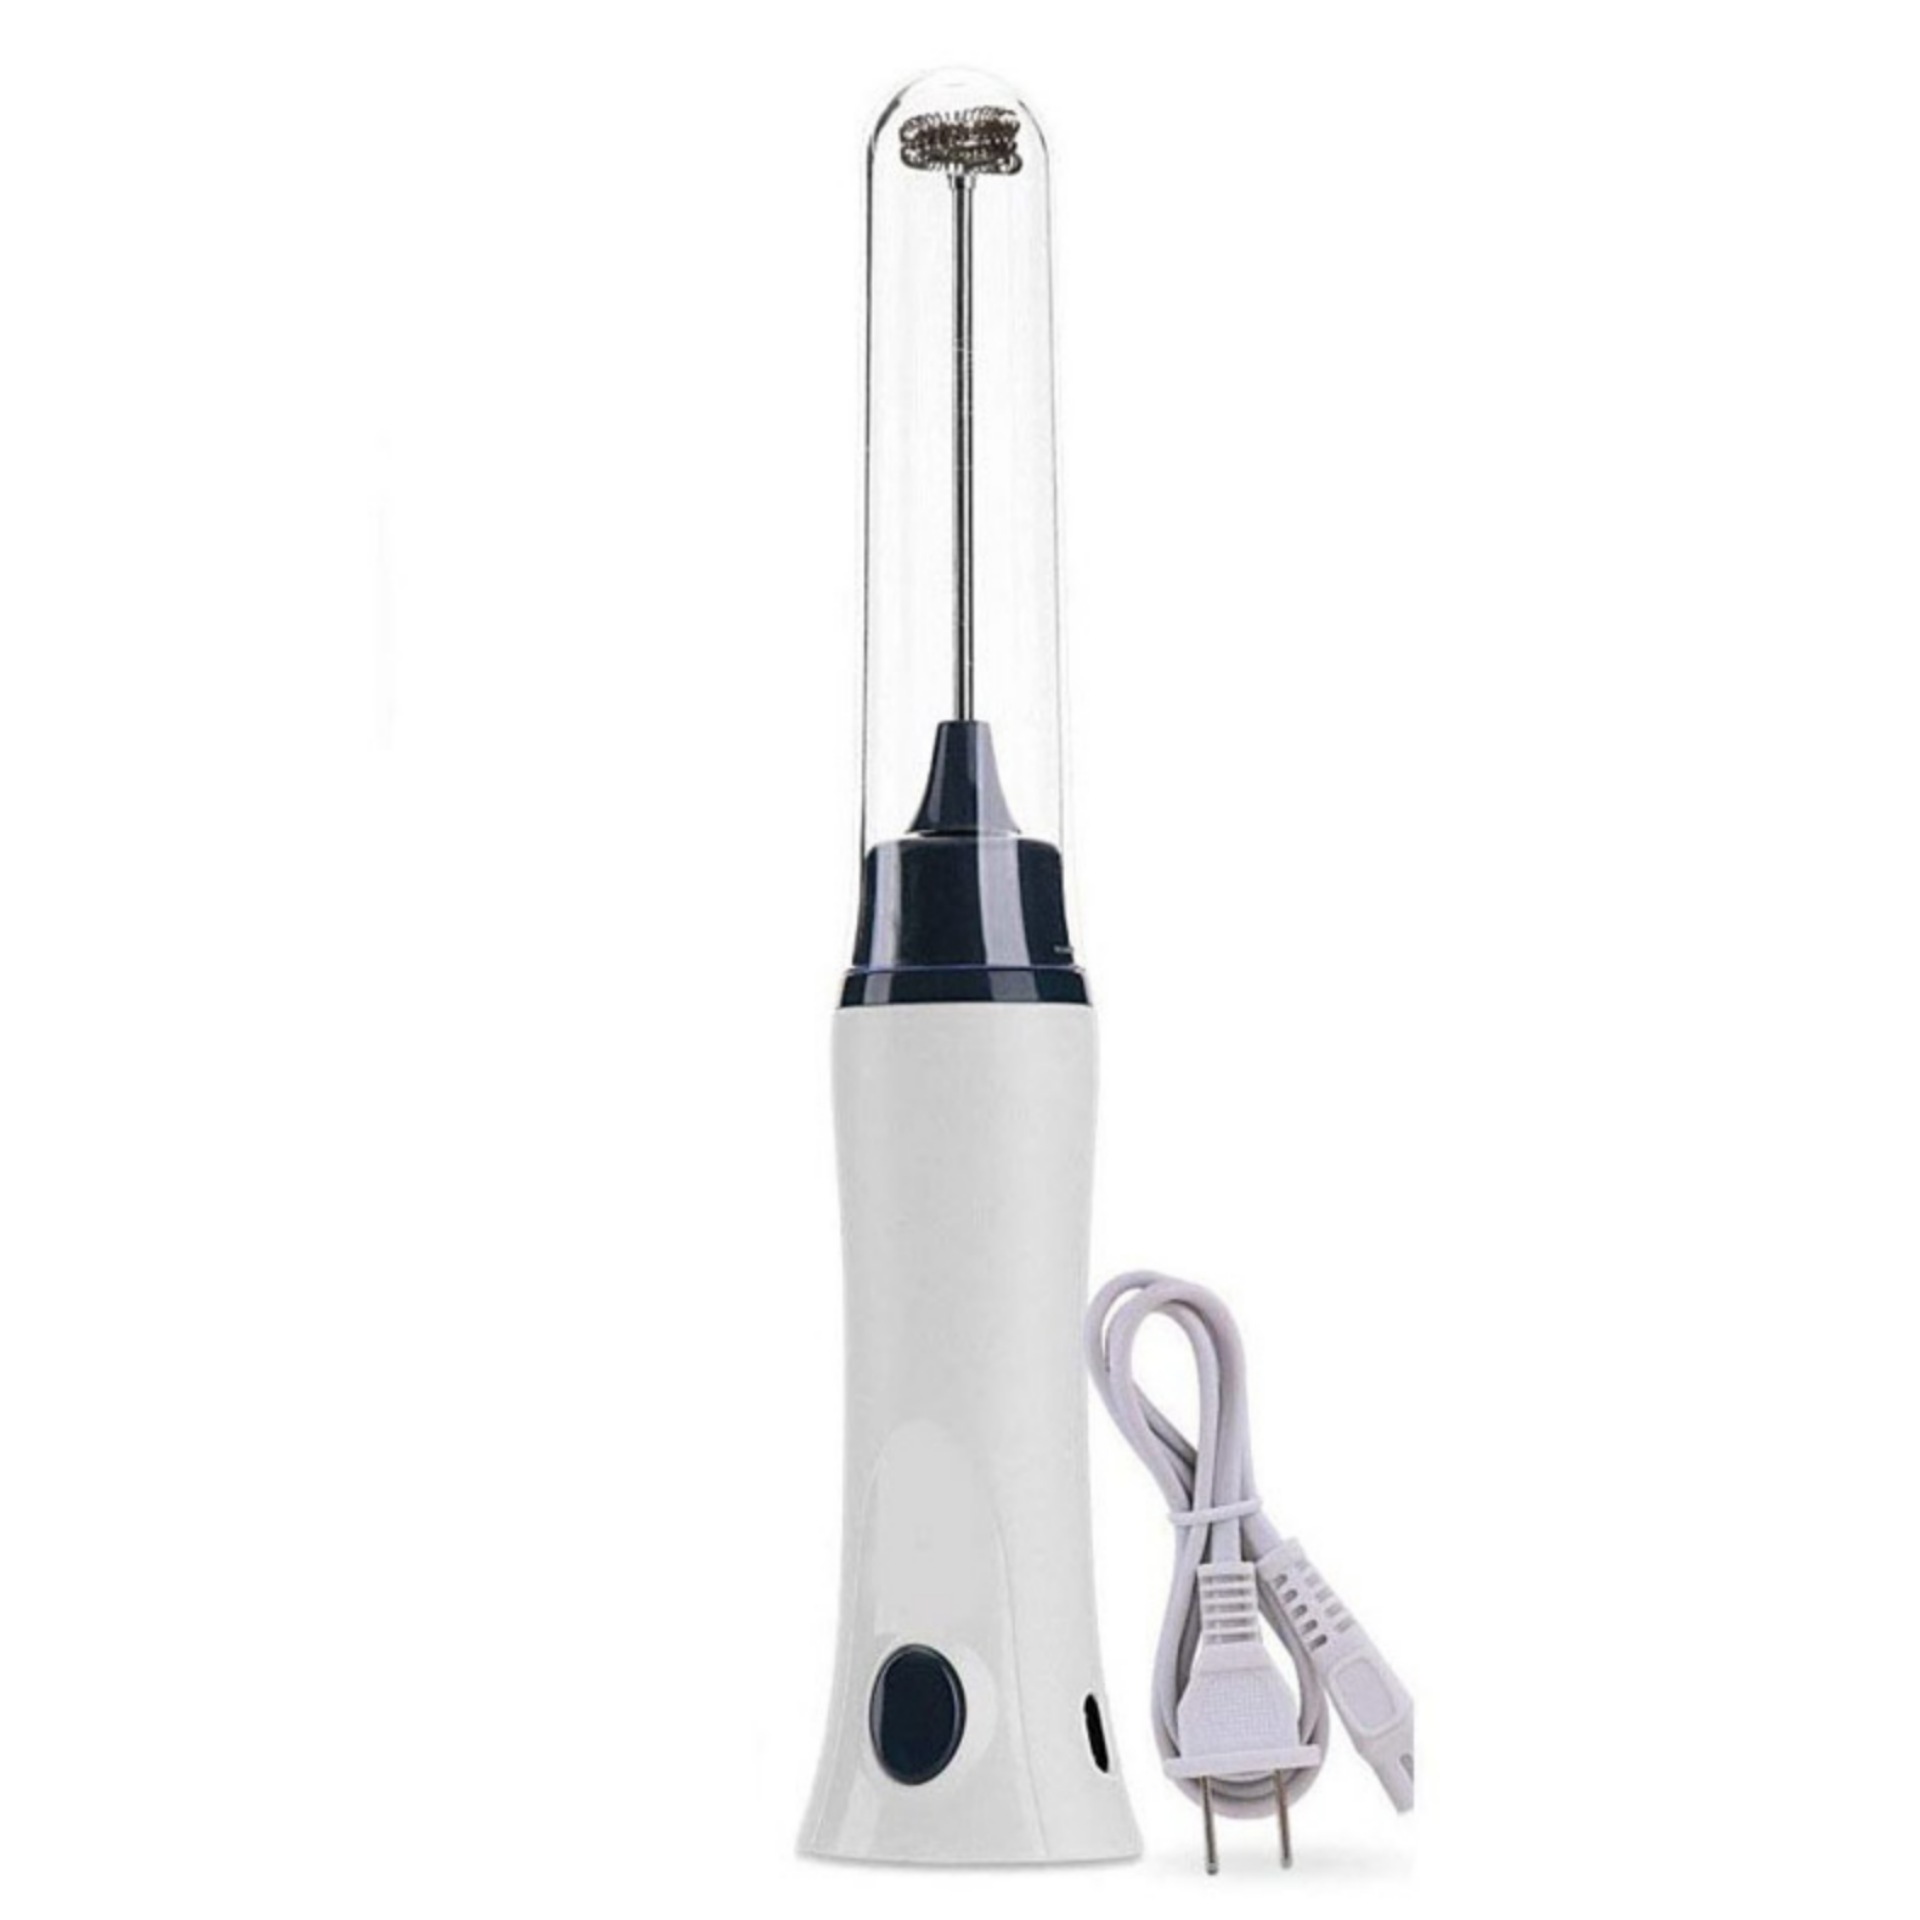 1pc Folding Electric Egg Beater, 3 Speeds Milk Frother Portable USB Mixer  Hand Held Coffee Whisk Household Kitchen Gadgets Foamer